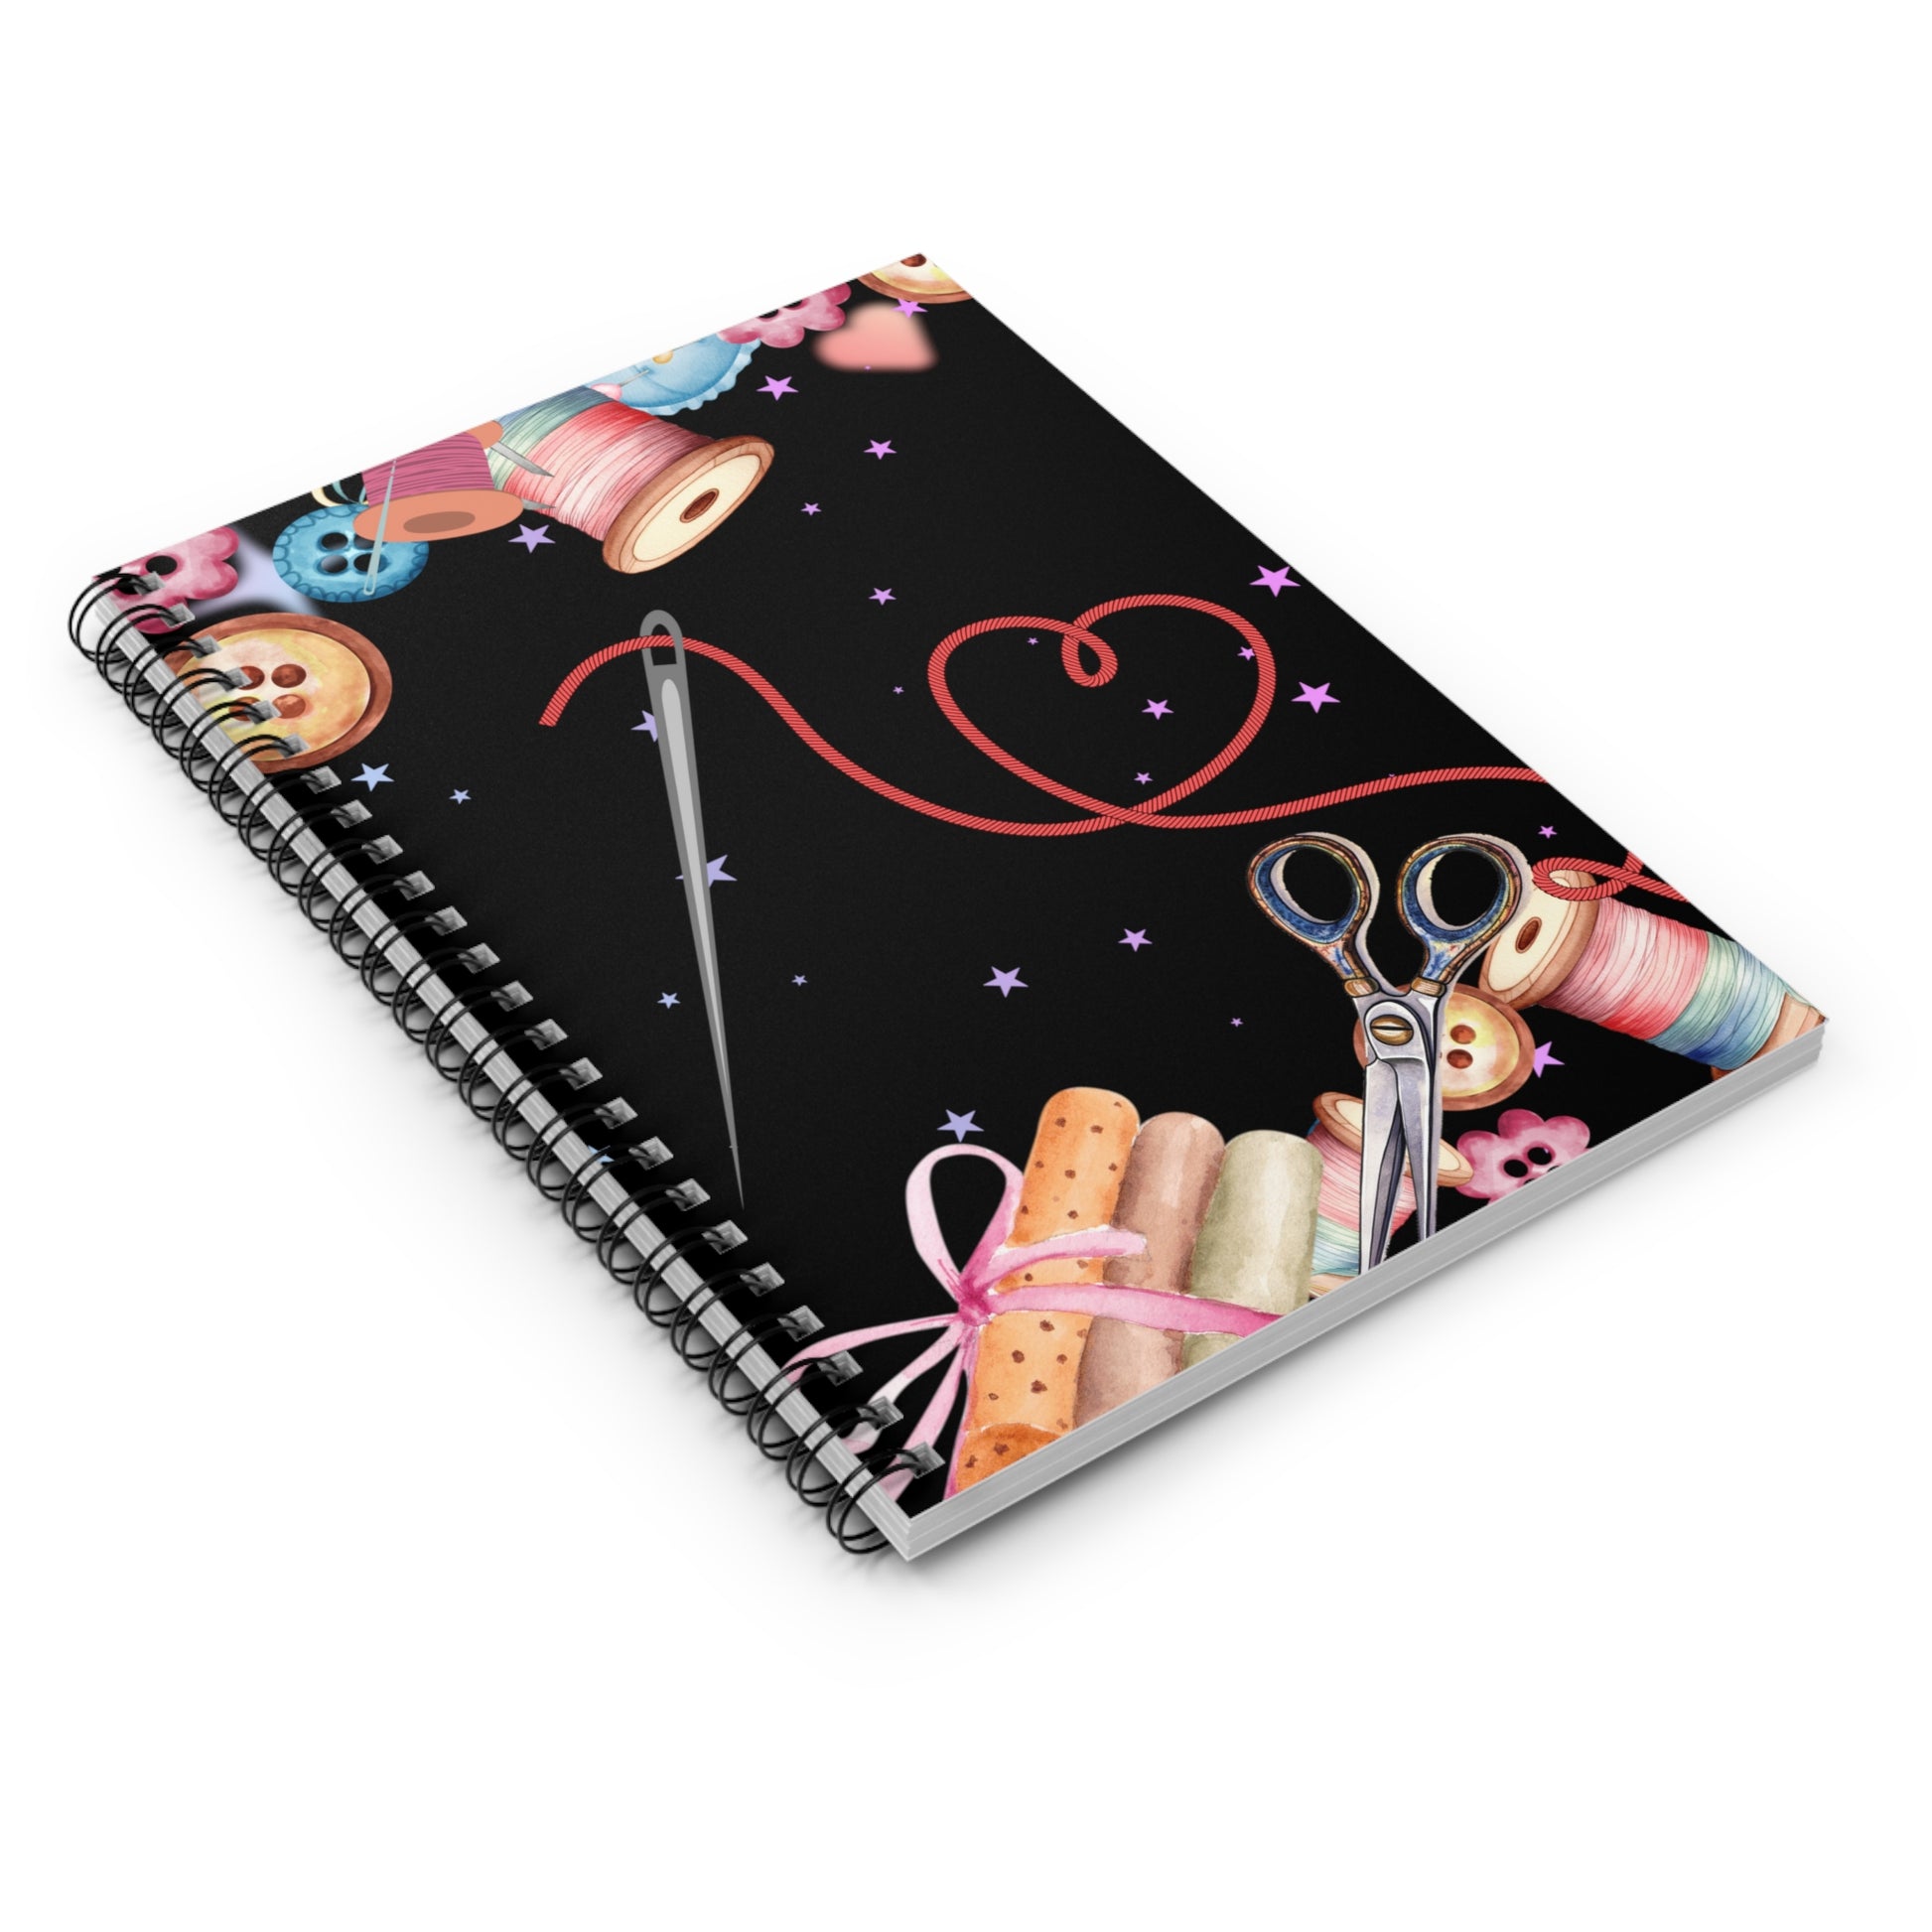 A Stitch in Time: Spiral Notebook - Log Books - Journals - Diaries - and More Custom Printed by TheGlassyLass